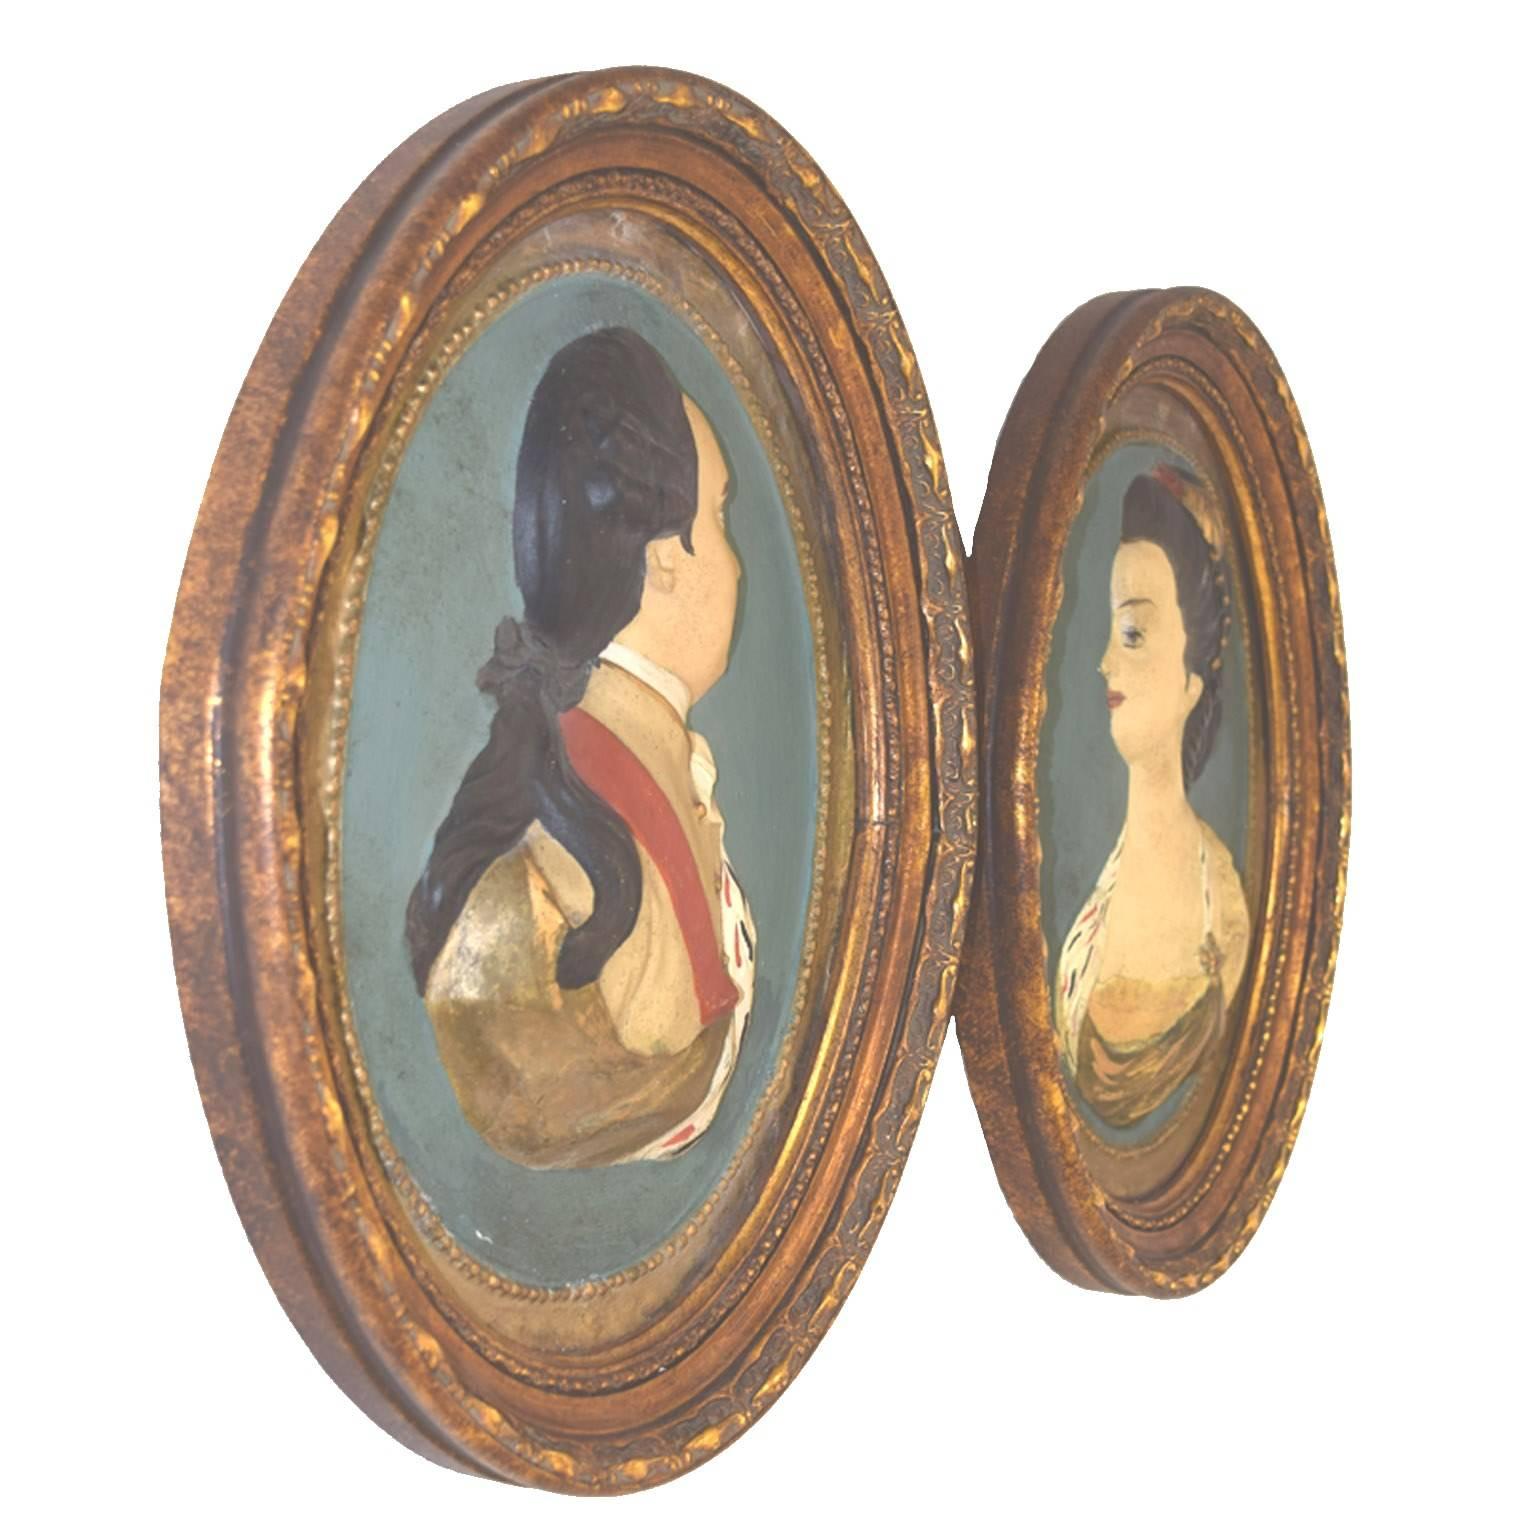 American late 18th century plastered and polychrome papier mâché oval plaques of English monarchs, George III and Queen Charlotte attributed to Henry Christian Geyer, of Boston, Massachusetts, contained in carved gold-leaf oval frames, circa 1765.